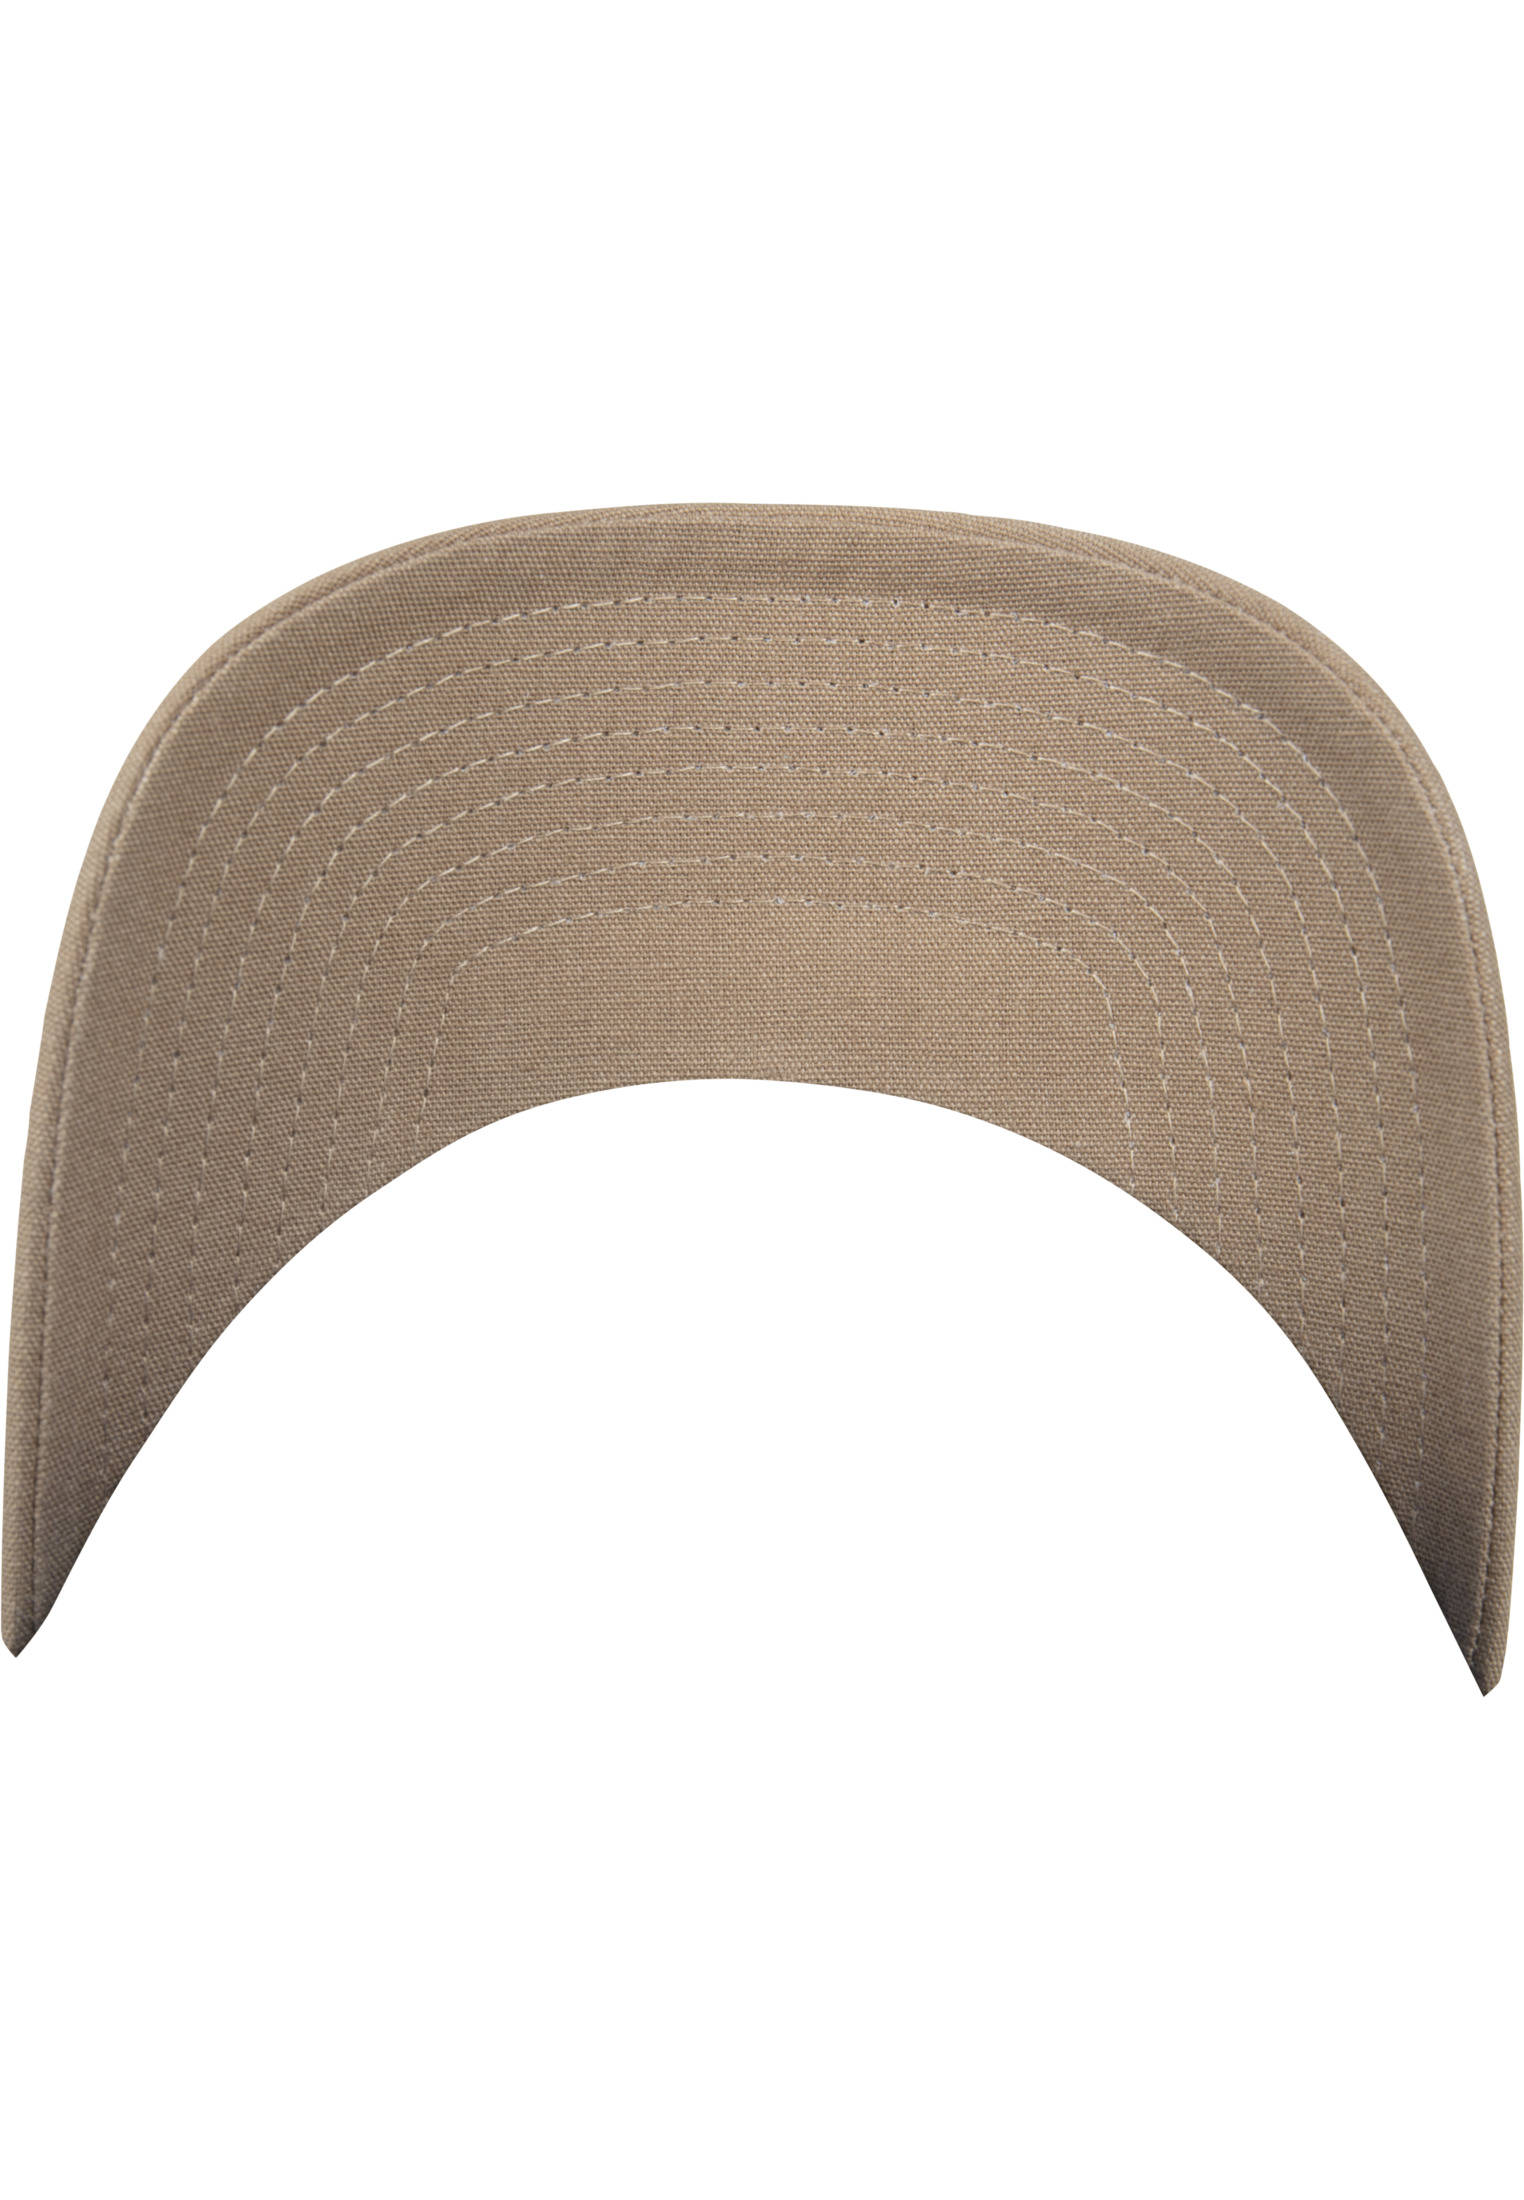 Metal 6-Panel Snap-7708MS Curved